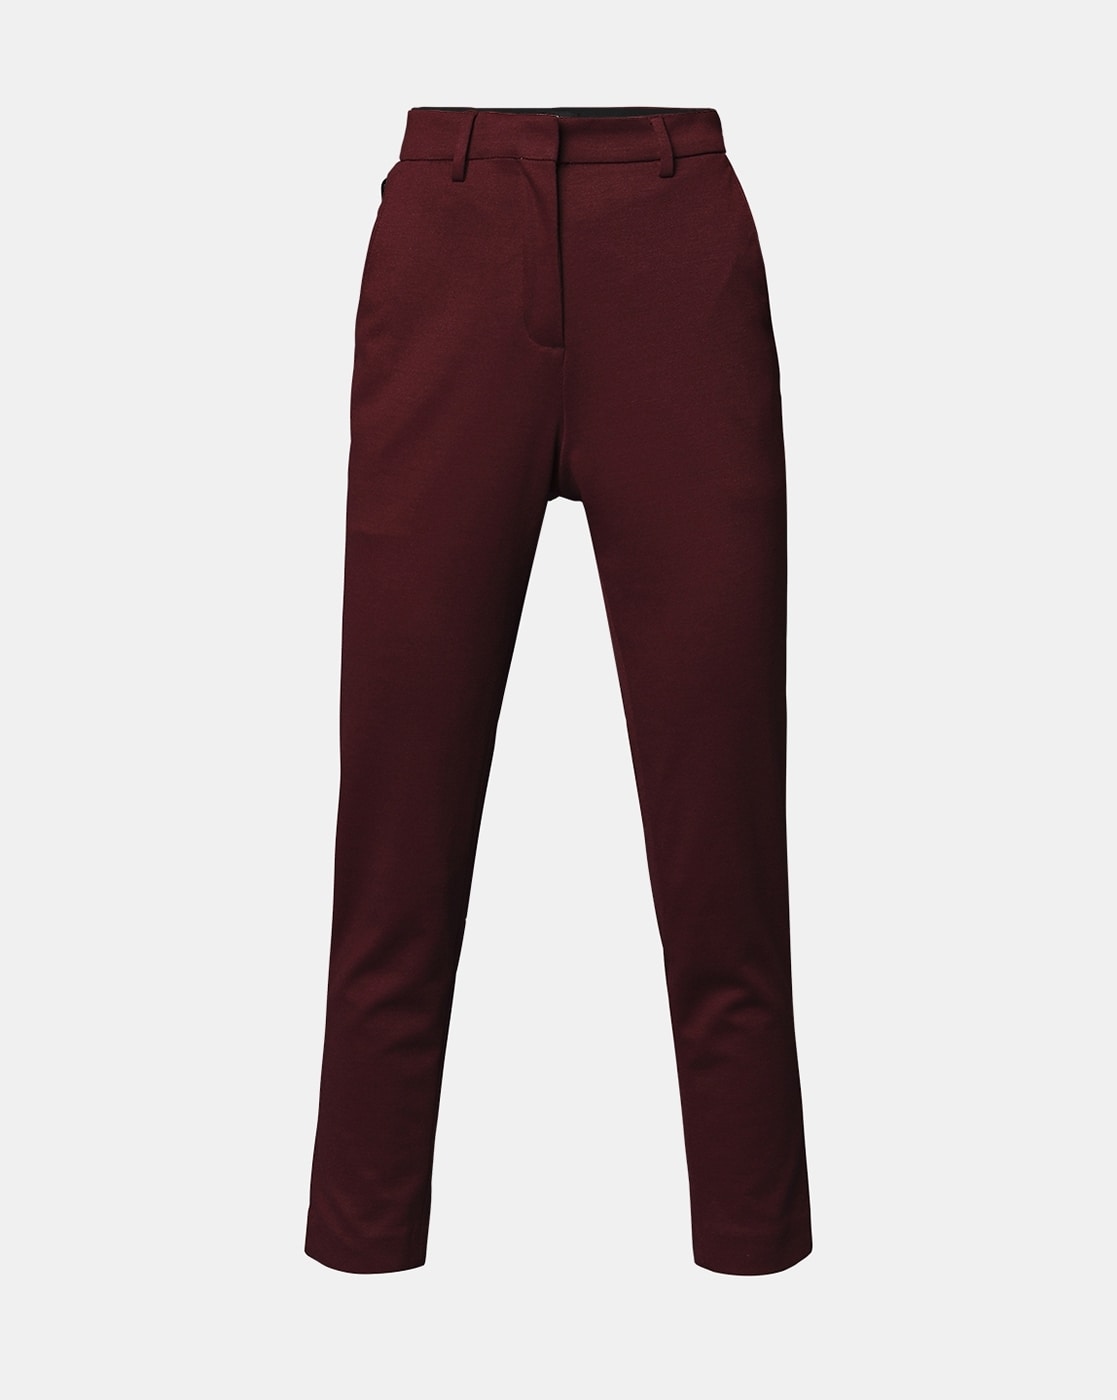 Penahaus - BRAND NEW COLORS !!! HOLLYWOOD TROUSERS by